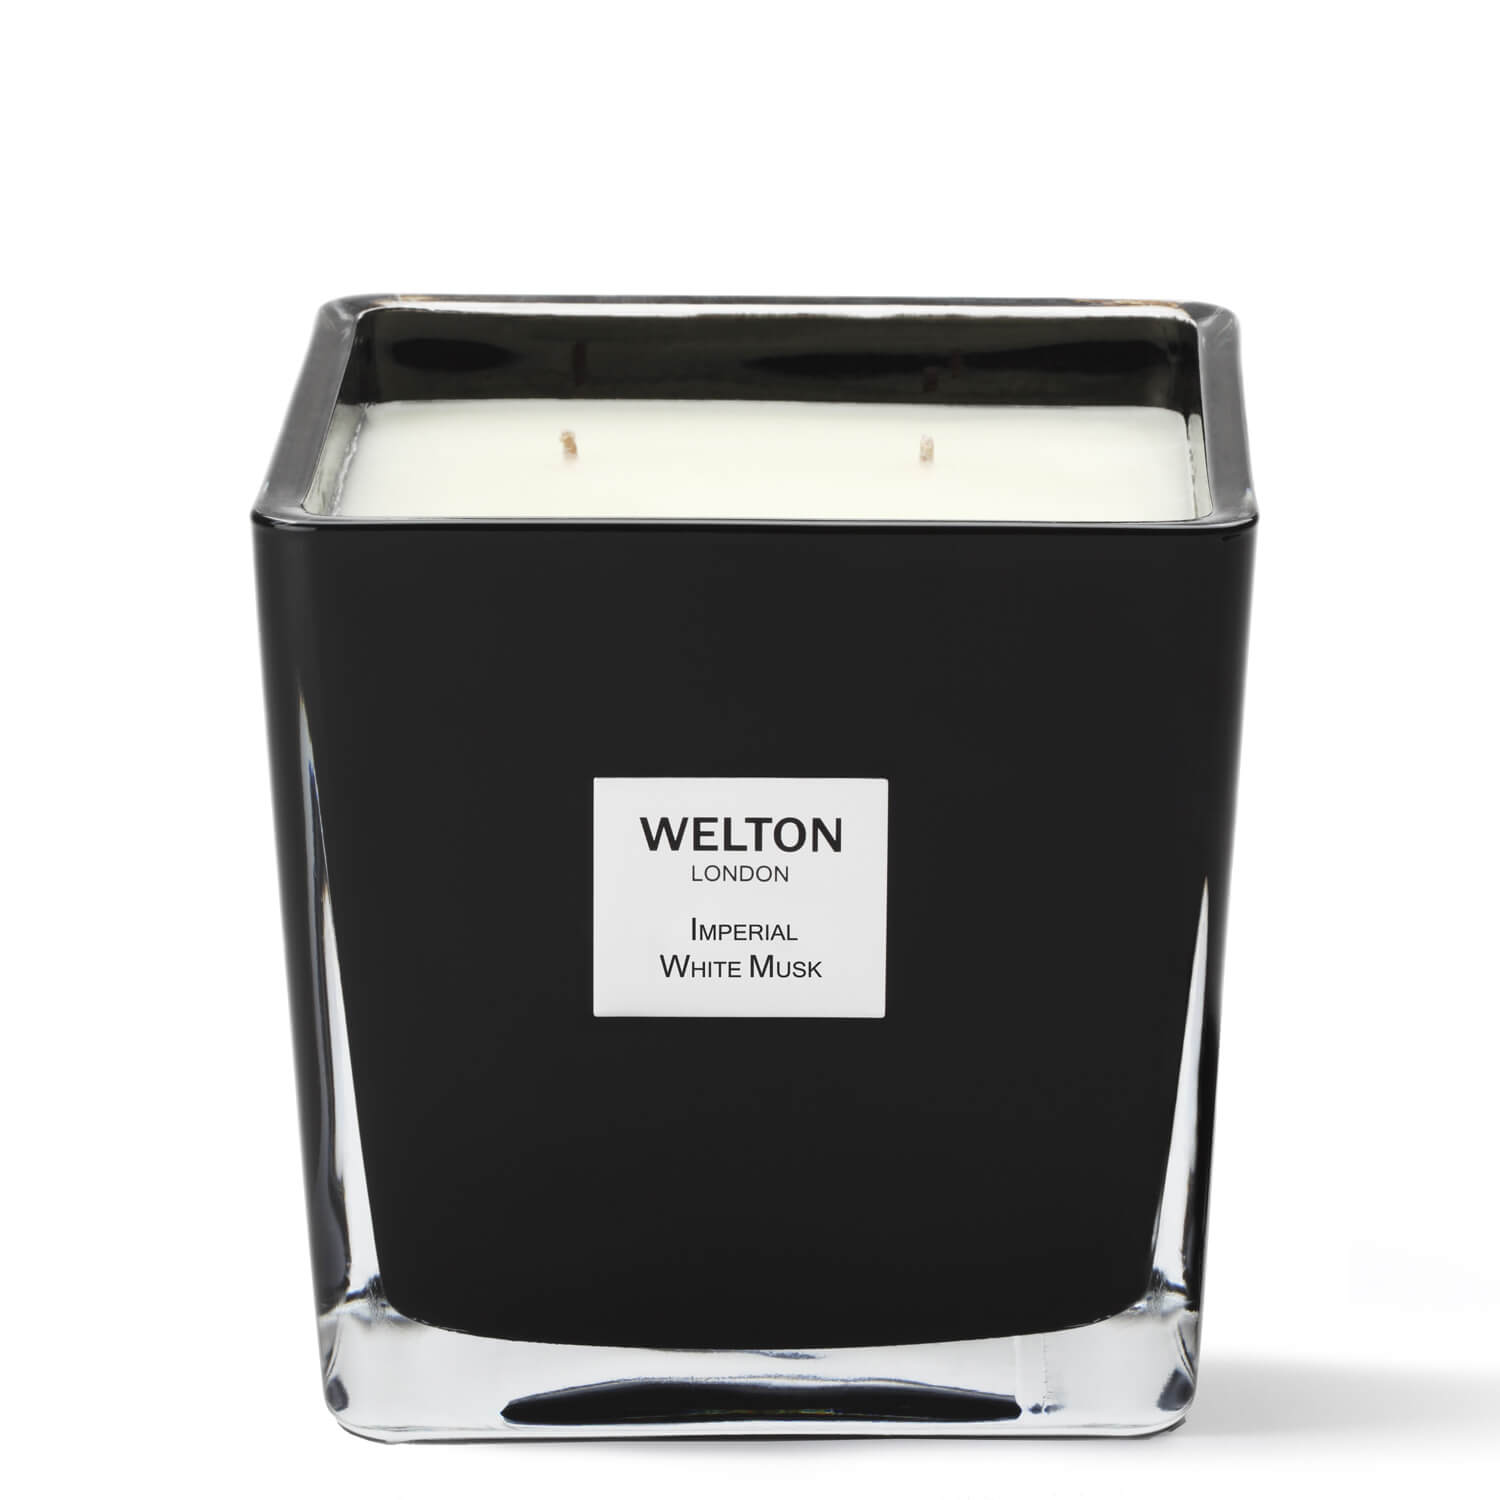 welton london candle imperial white musk large
floral - musky scented candles 